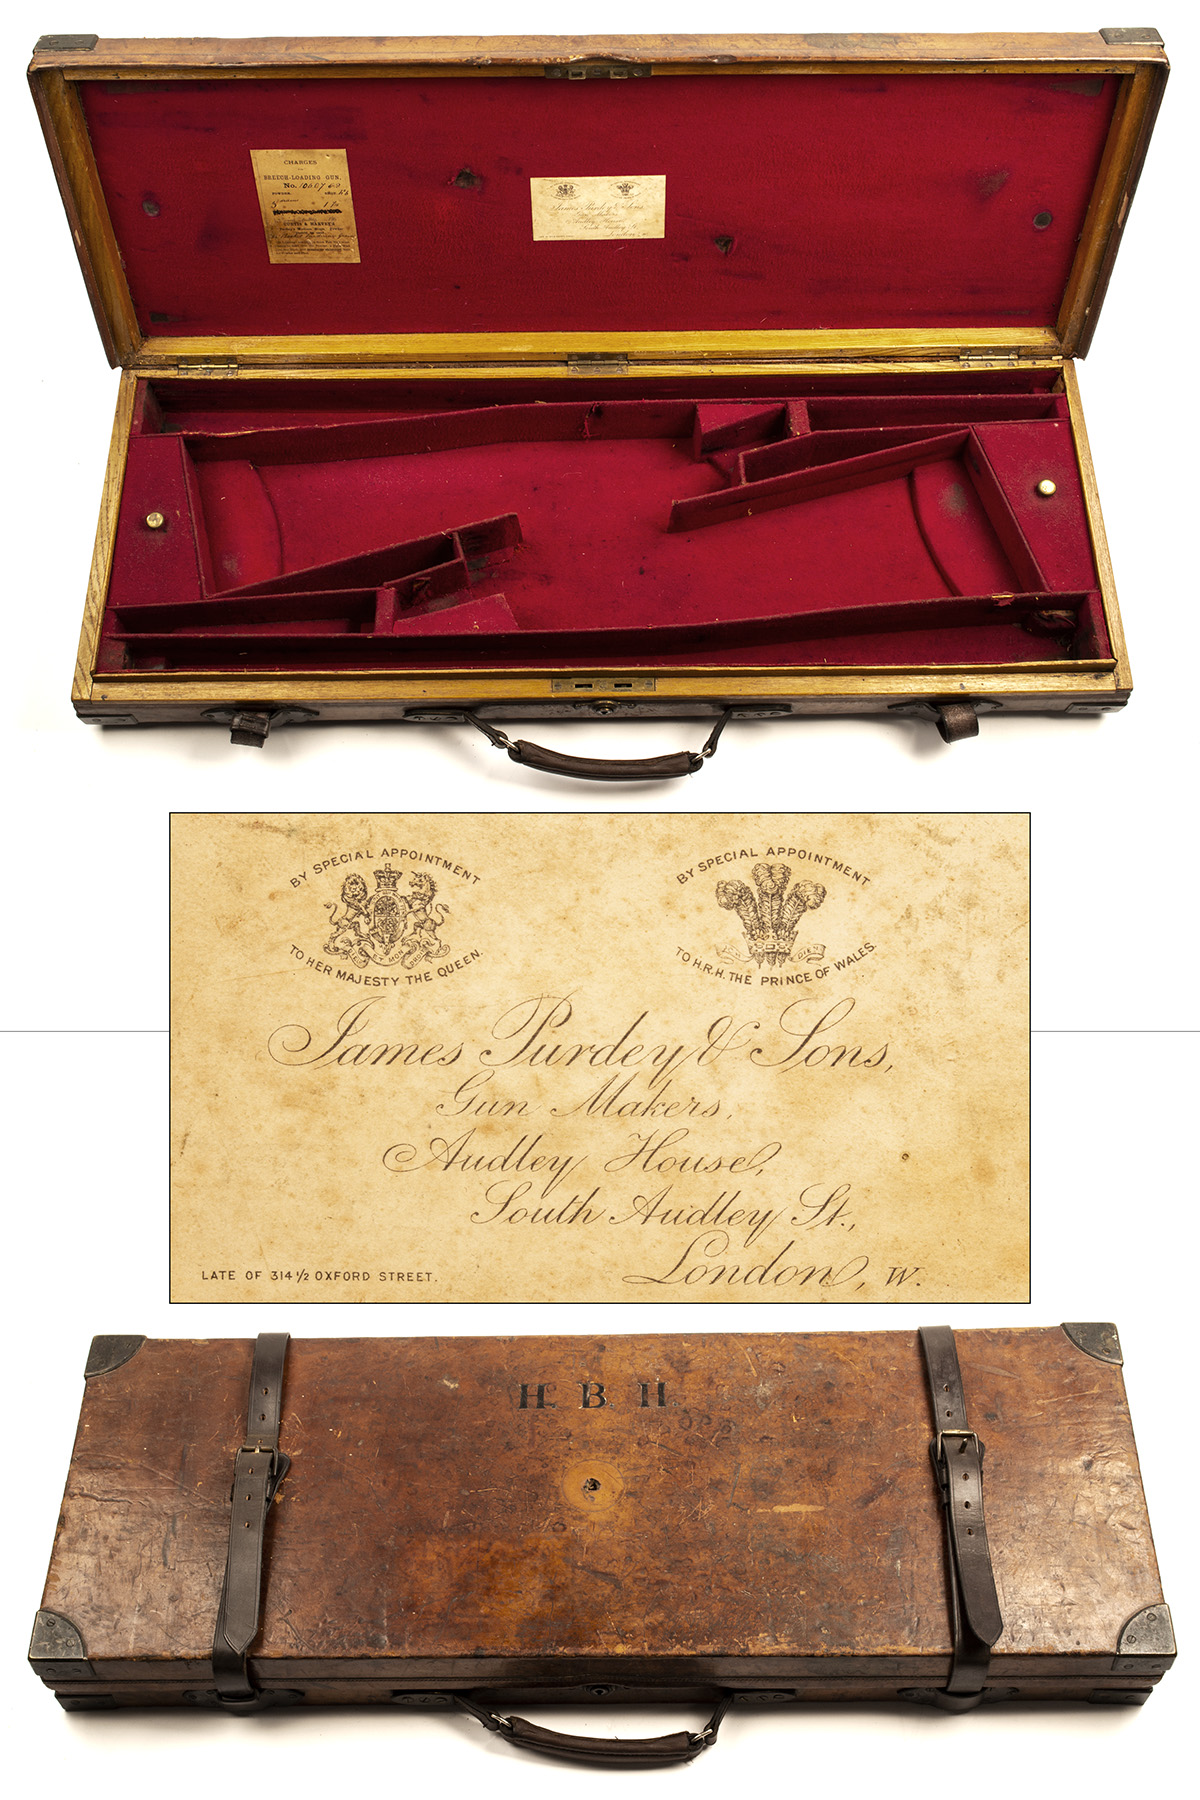 JAMES PURDEY & SONS - A BRASS-CORNERED OAK AND LEATHER DOUBLE GUNCASE